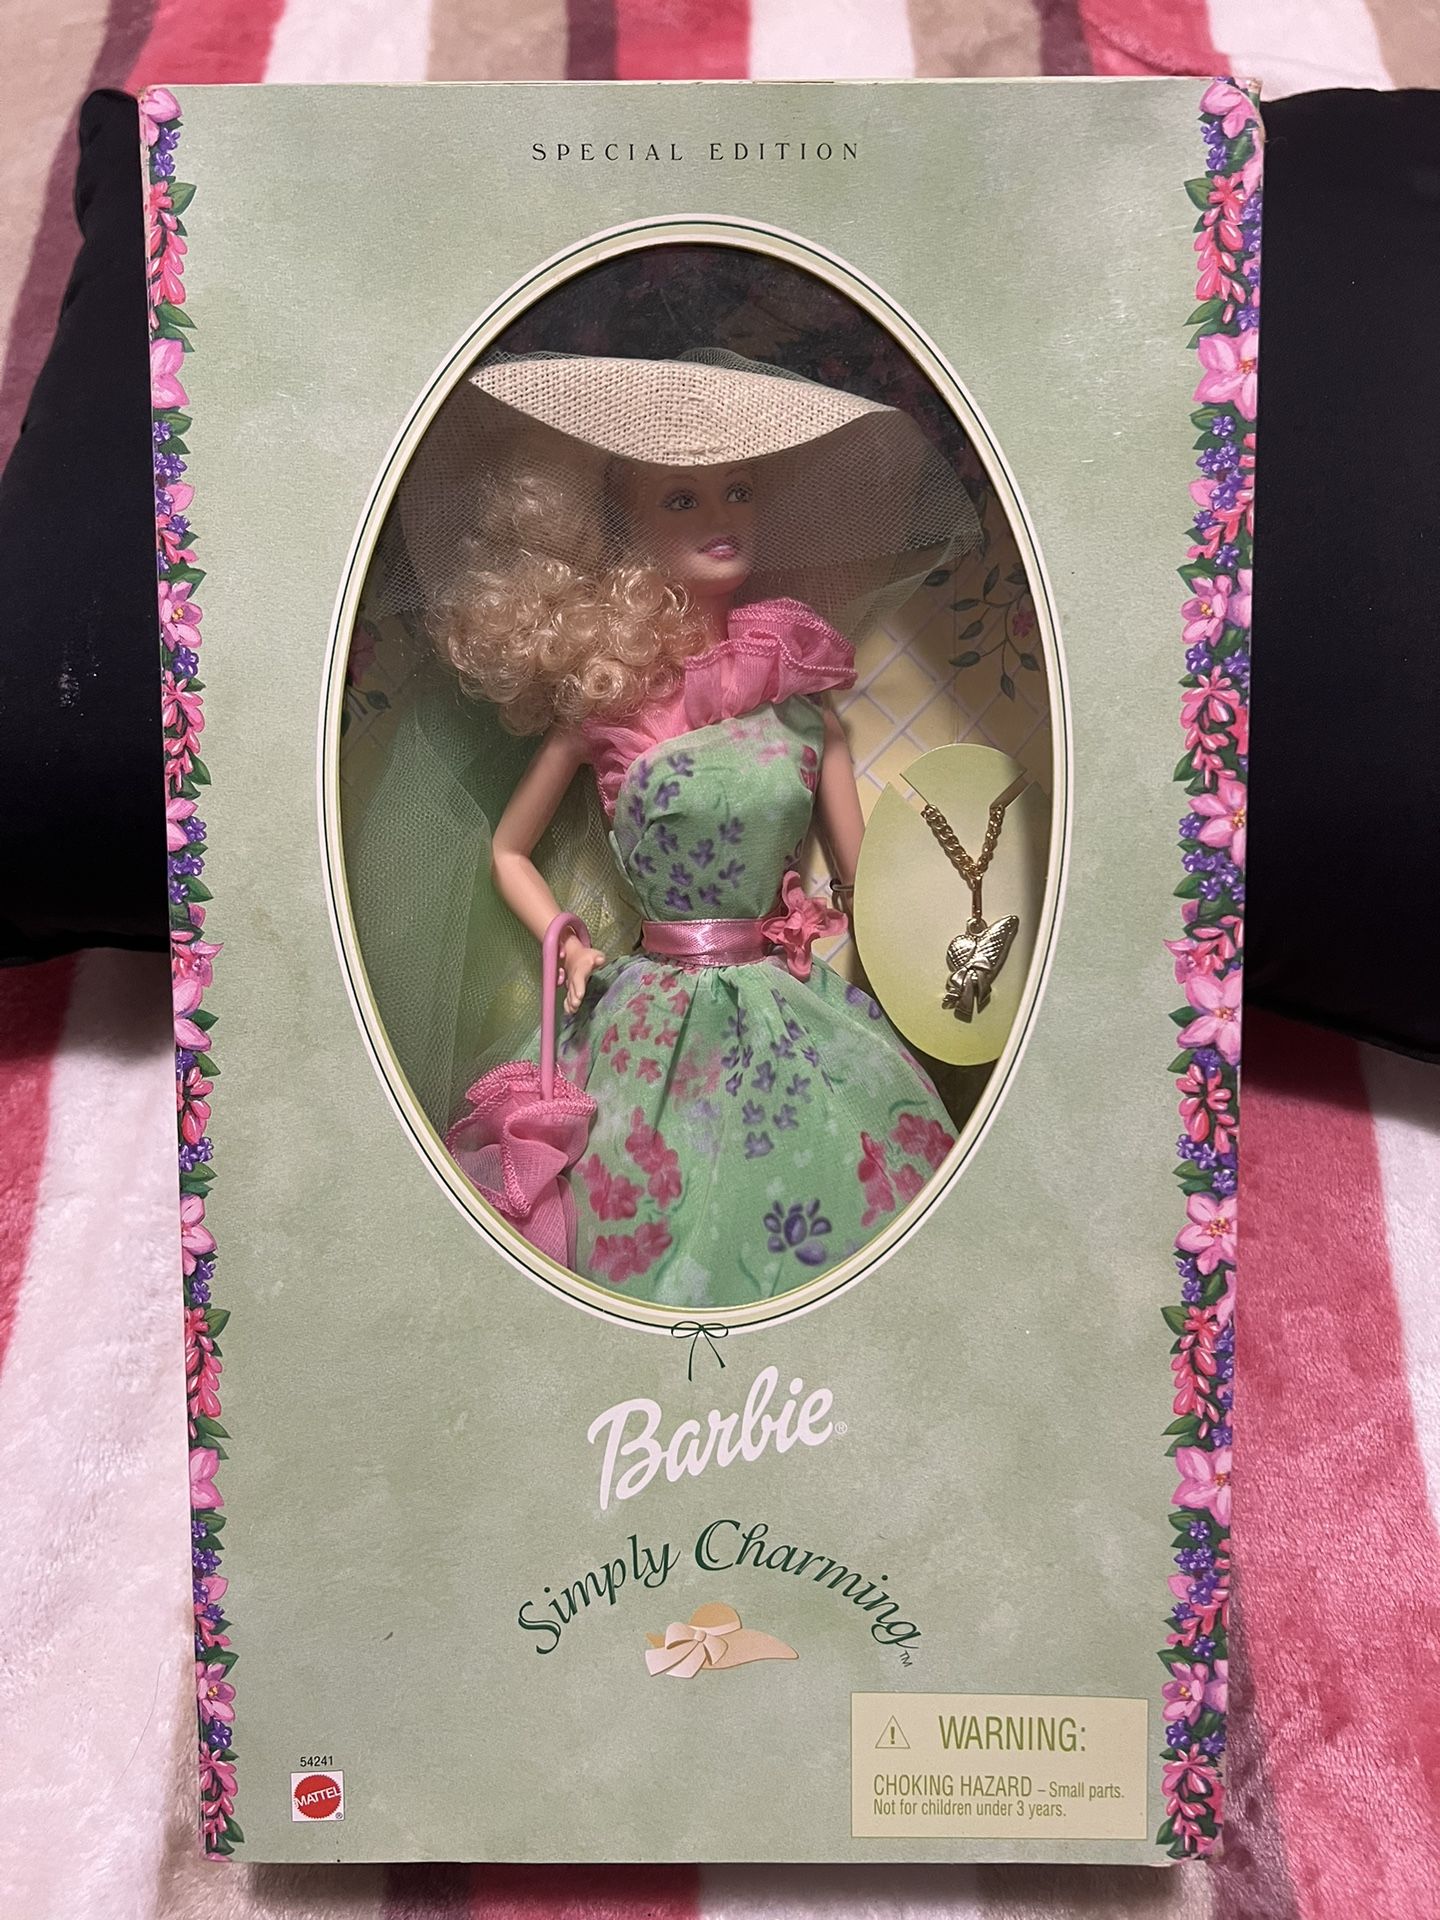 Avon Special Edition “Simply Charming” Barbie New in Box 2001 